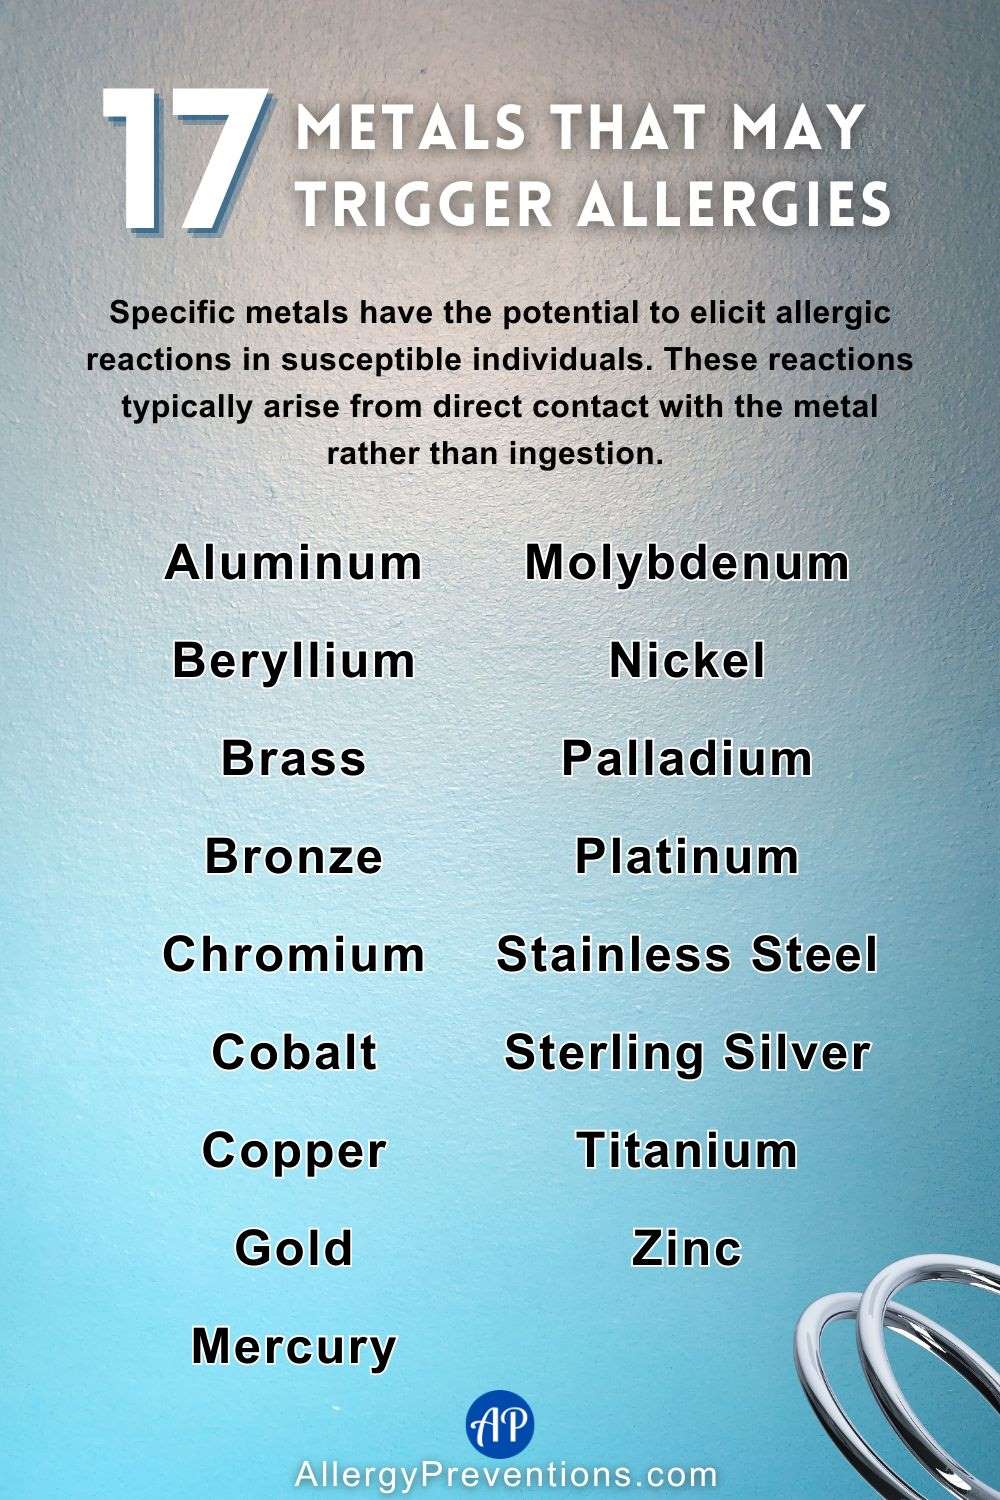 Metals that may trigger allergies infographic. Specific metals have the potential to elicit allergic reactions in susceptible individuals. These reactions typically arise from direct contact with the metal rather than ingestion. Types of metals that may cause reactions list: Aluminum, Beryllium, Brass, Bronze, Chromium, Cobalt, Copper, Gold, Mercury, Molybdenum, Nickel, Palladium, Platinum, Stainless Steel, Sterling Silver, Titanium, and Zinc.